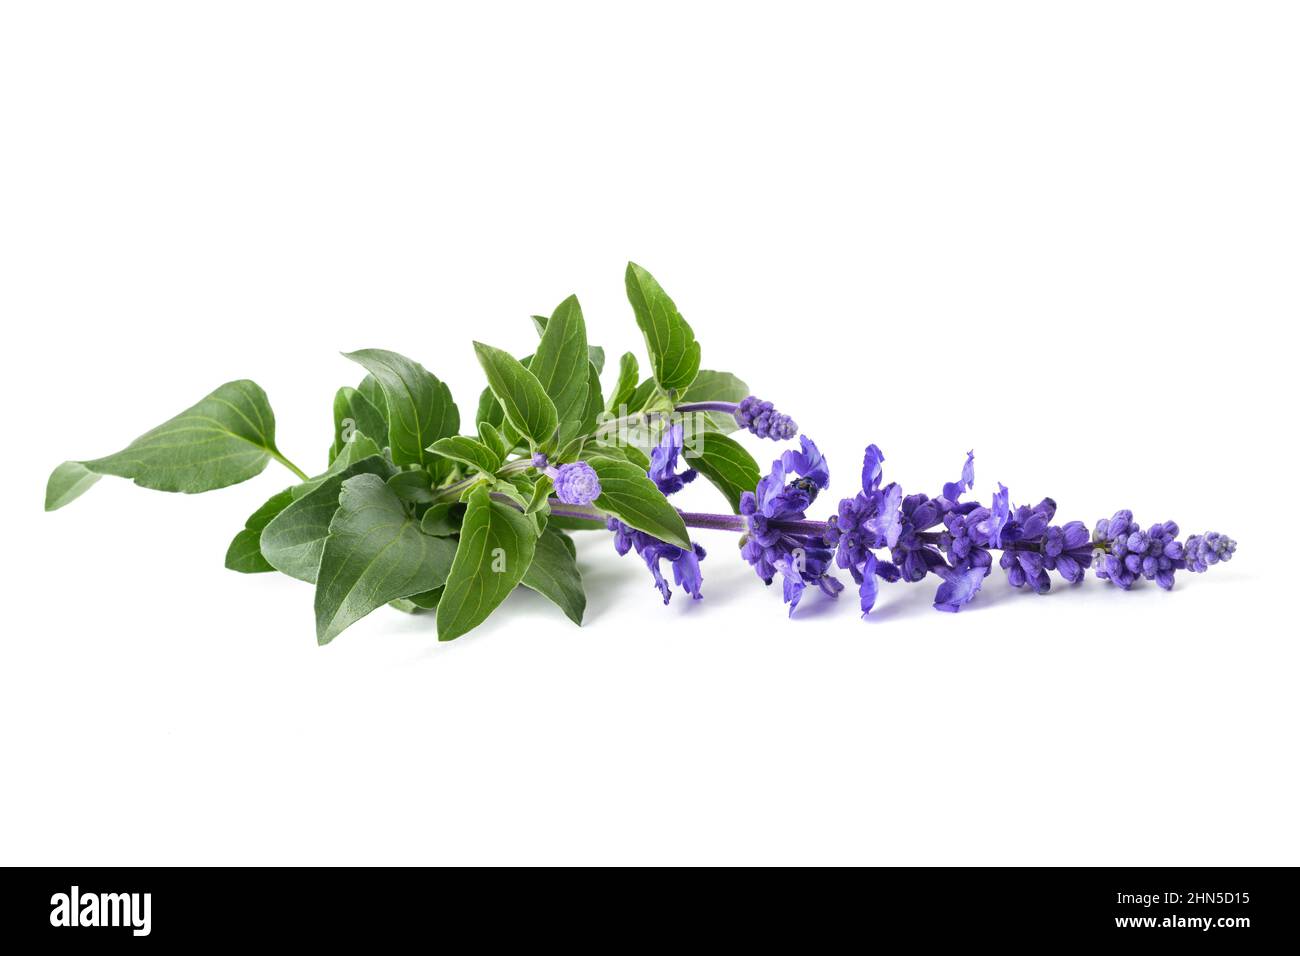 Salvia farinacea with flowers isolated on white background Stock Photo